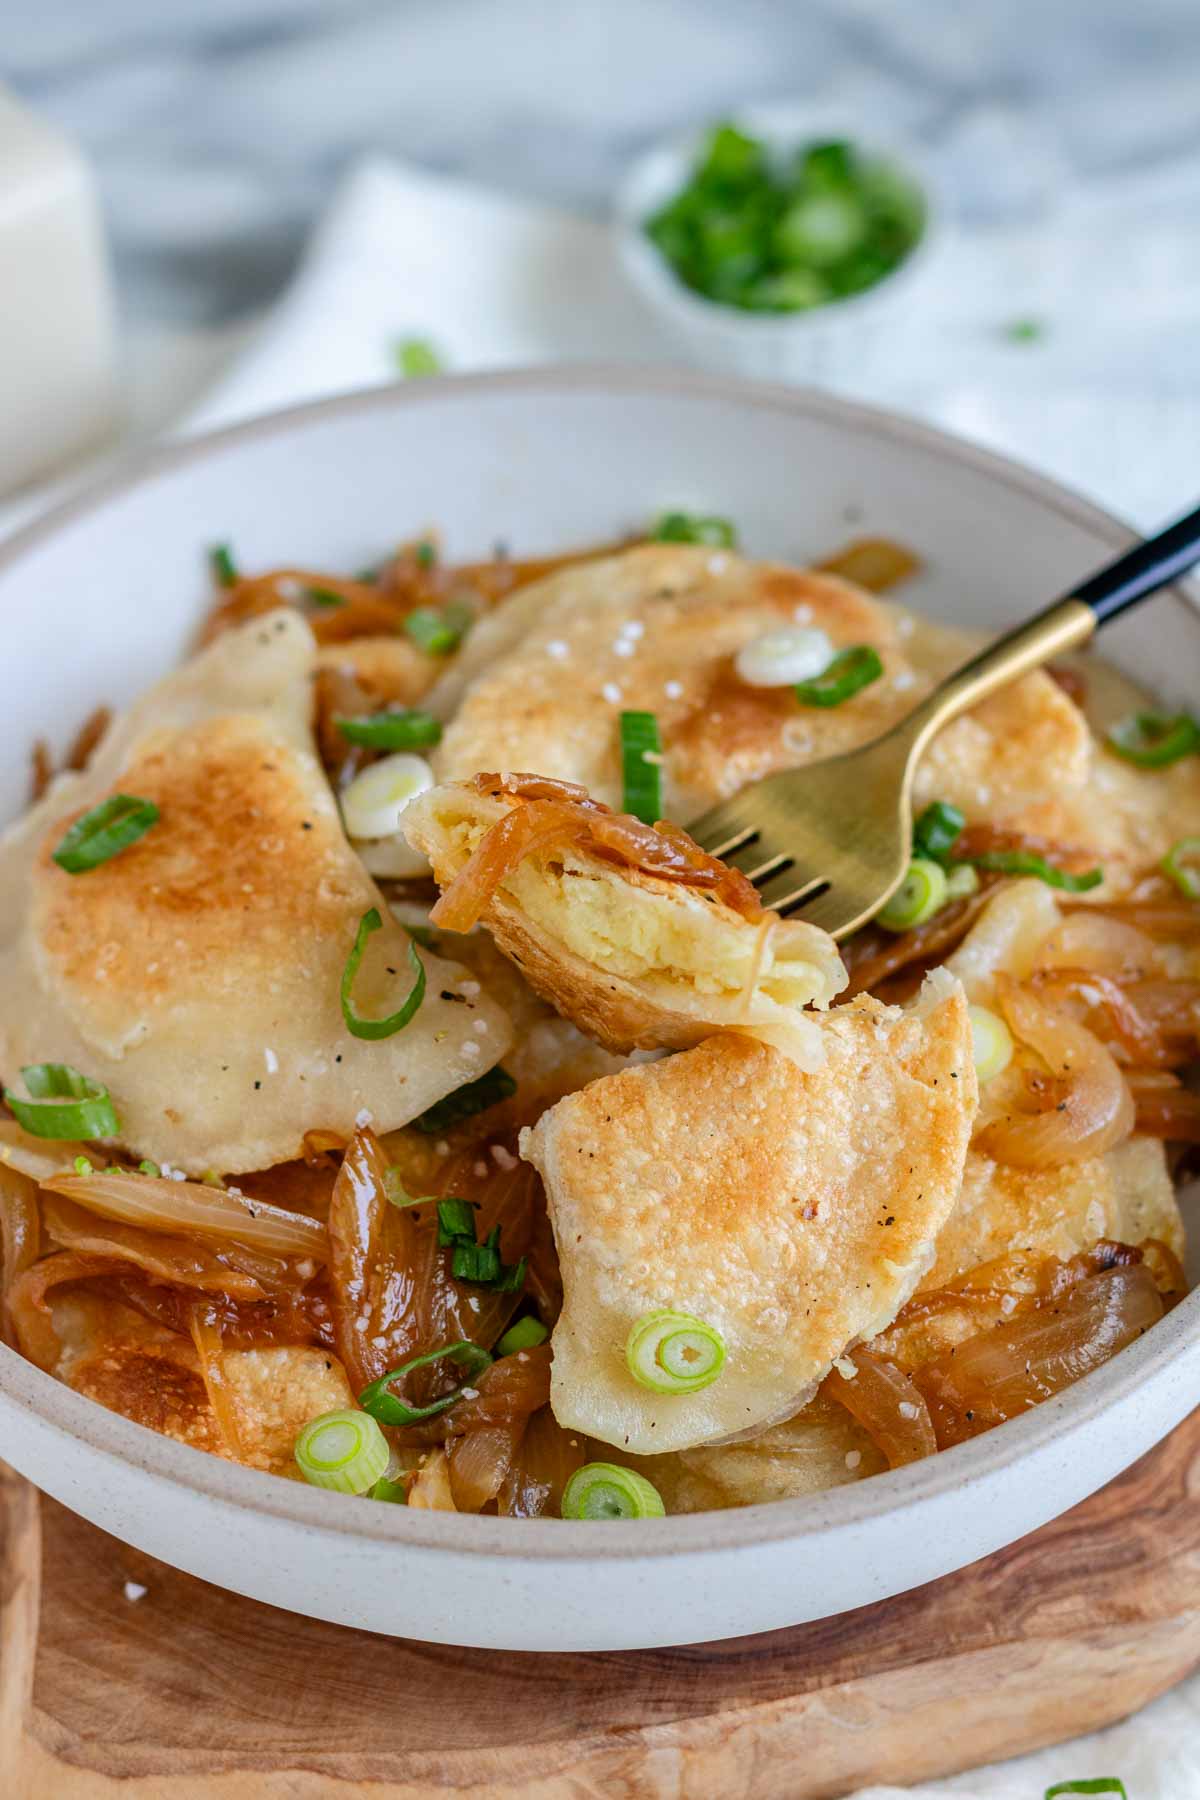 Vegan pierogis in a bowl with onion and a fork.